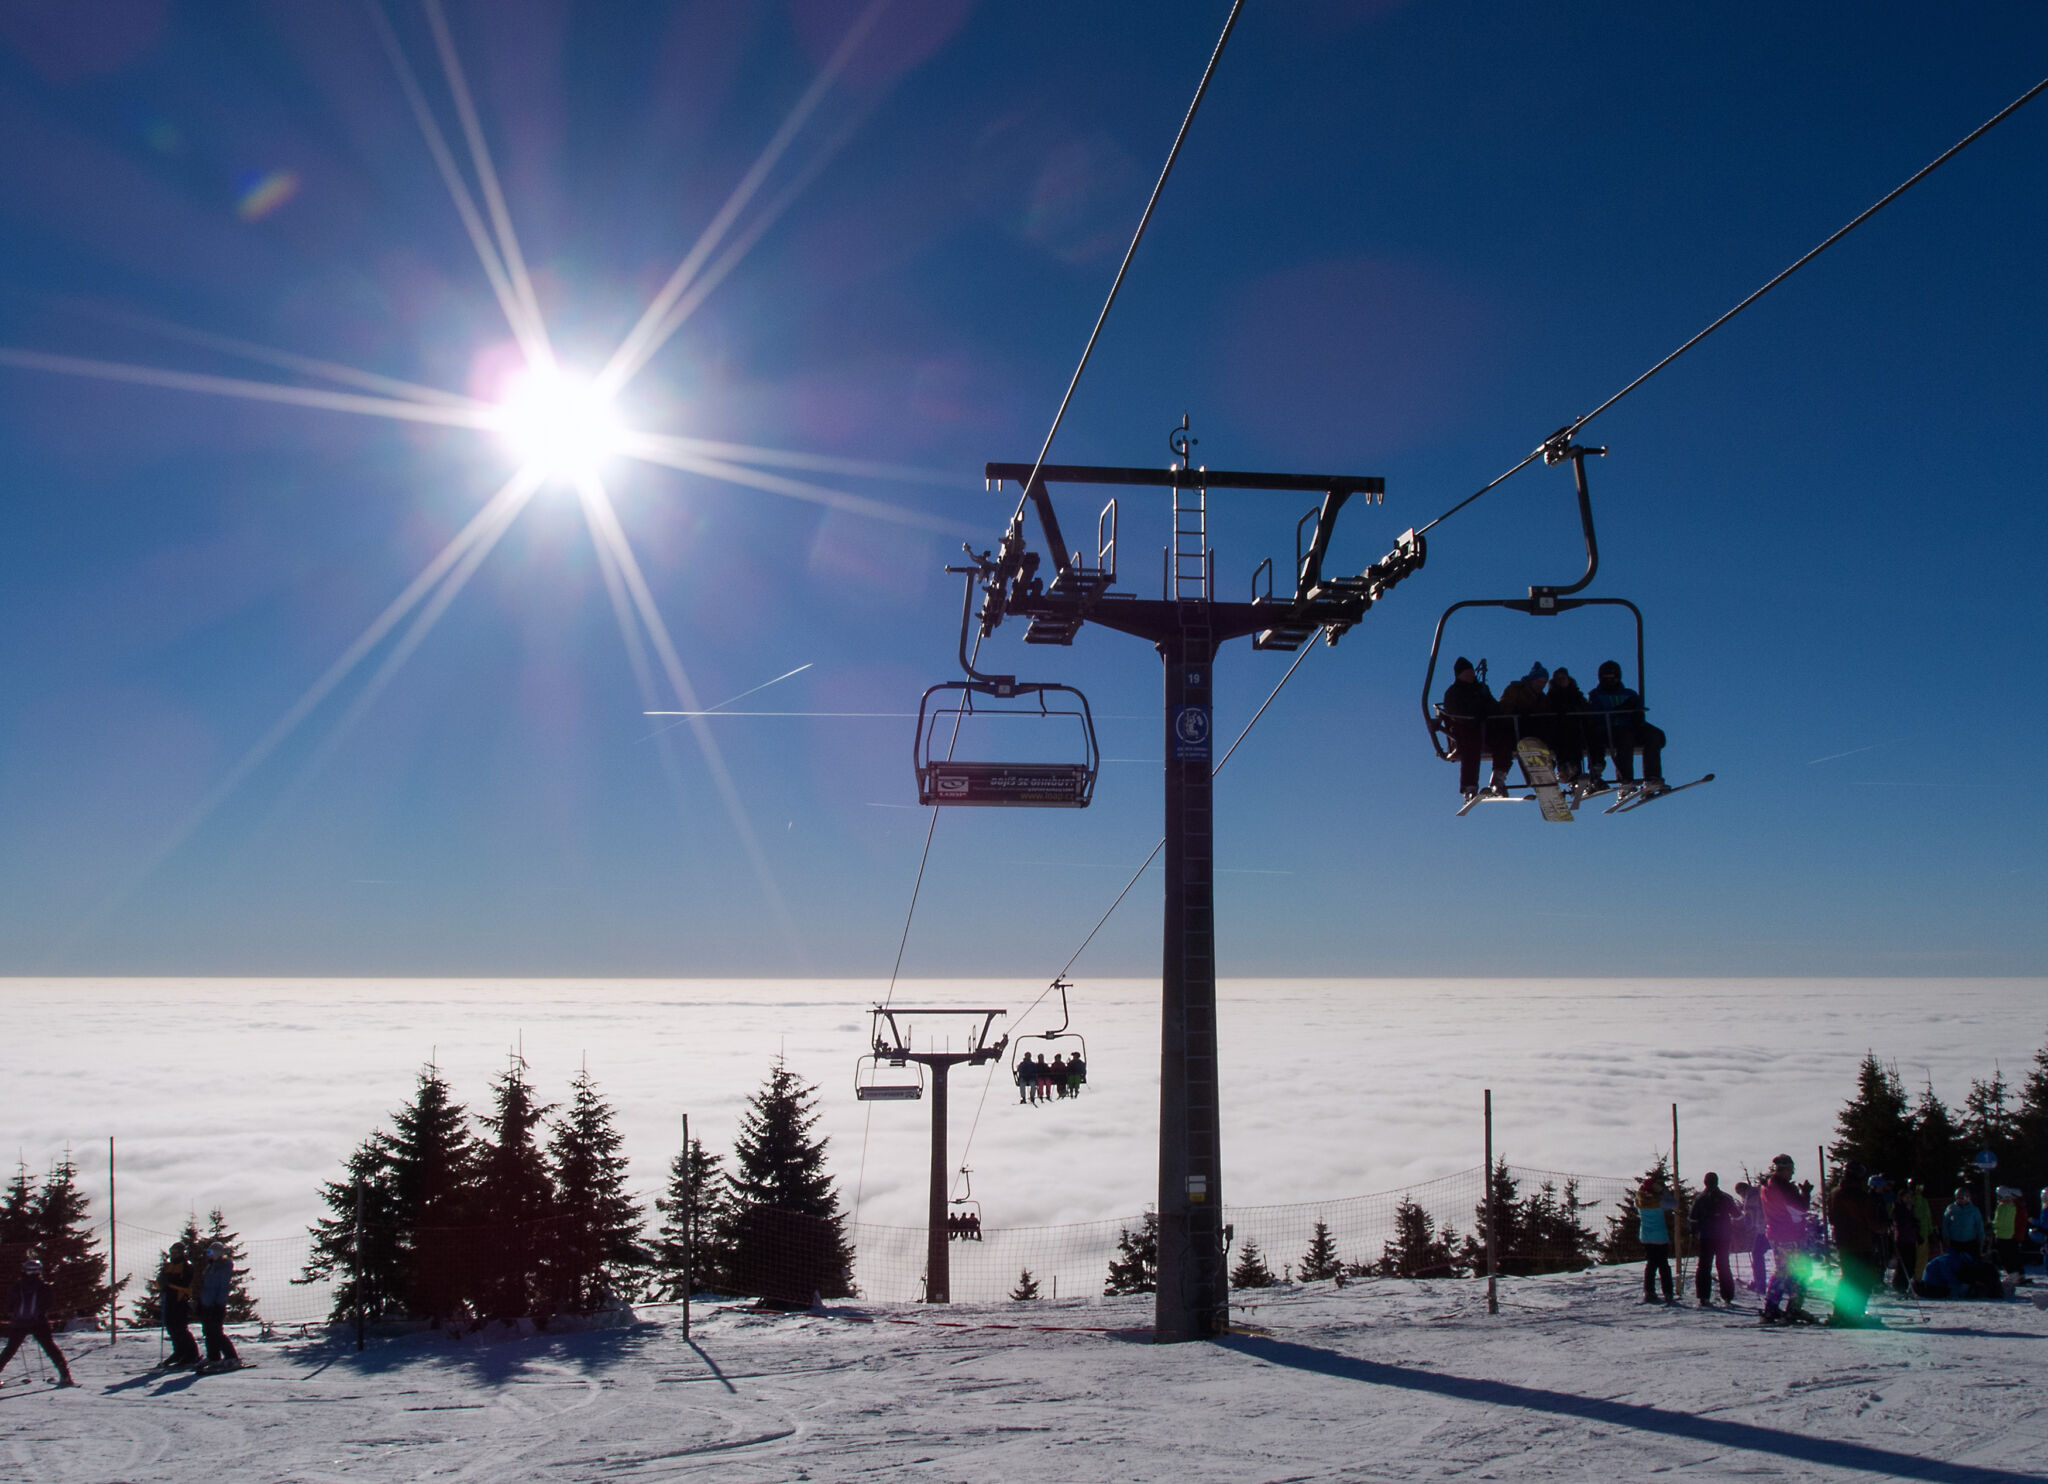 A Chair Lift At The Top Of A Mountain On A Sunny Day Copyright Free